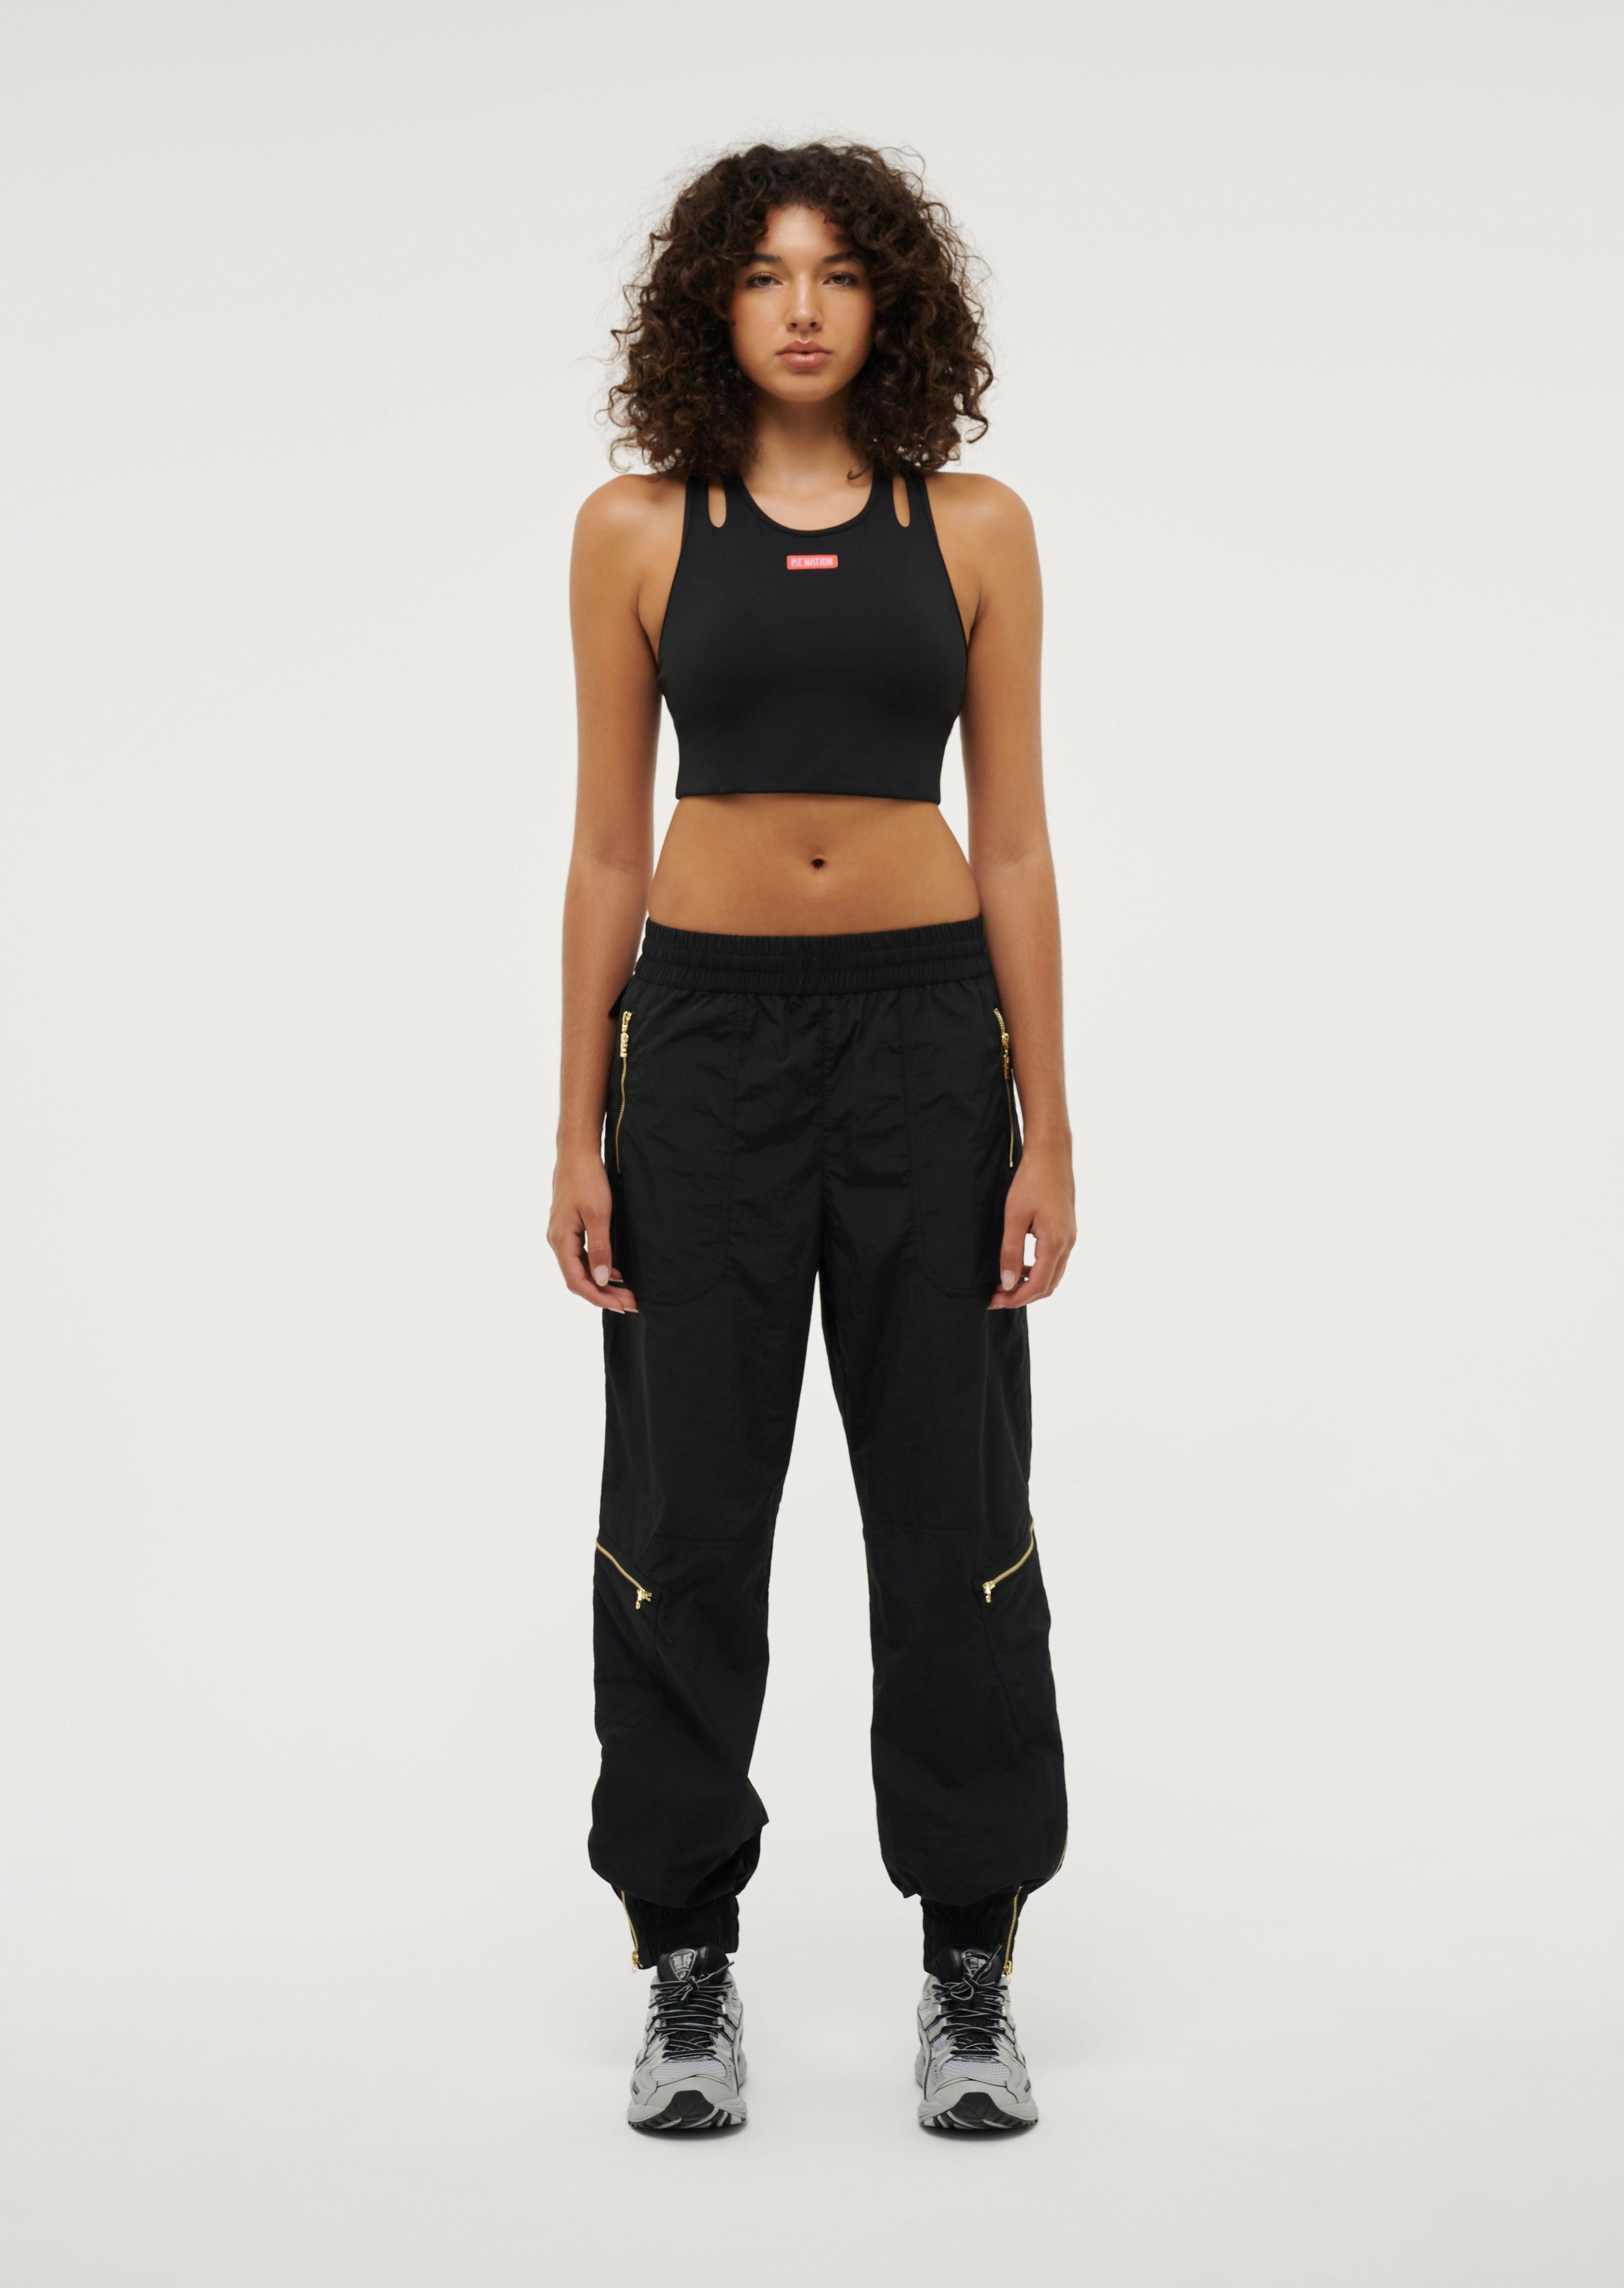 PITLANE PANT IN BLACK by P.E NATION